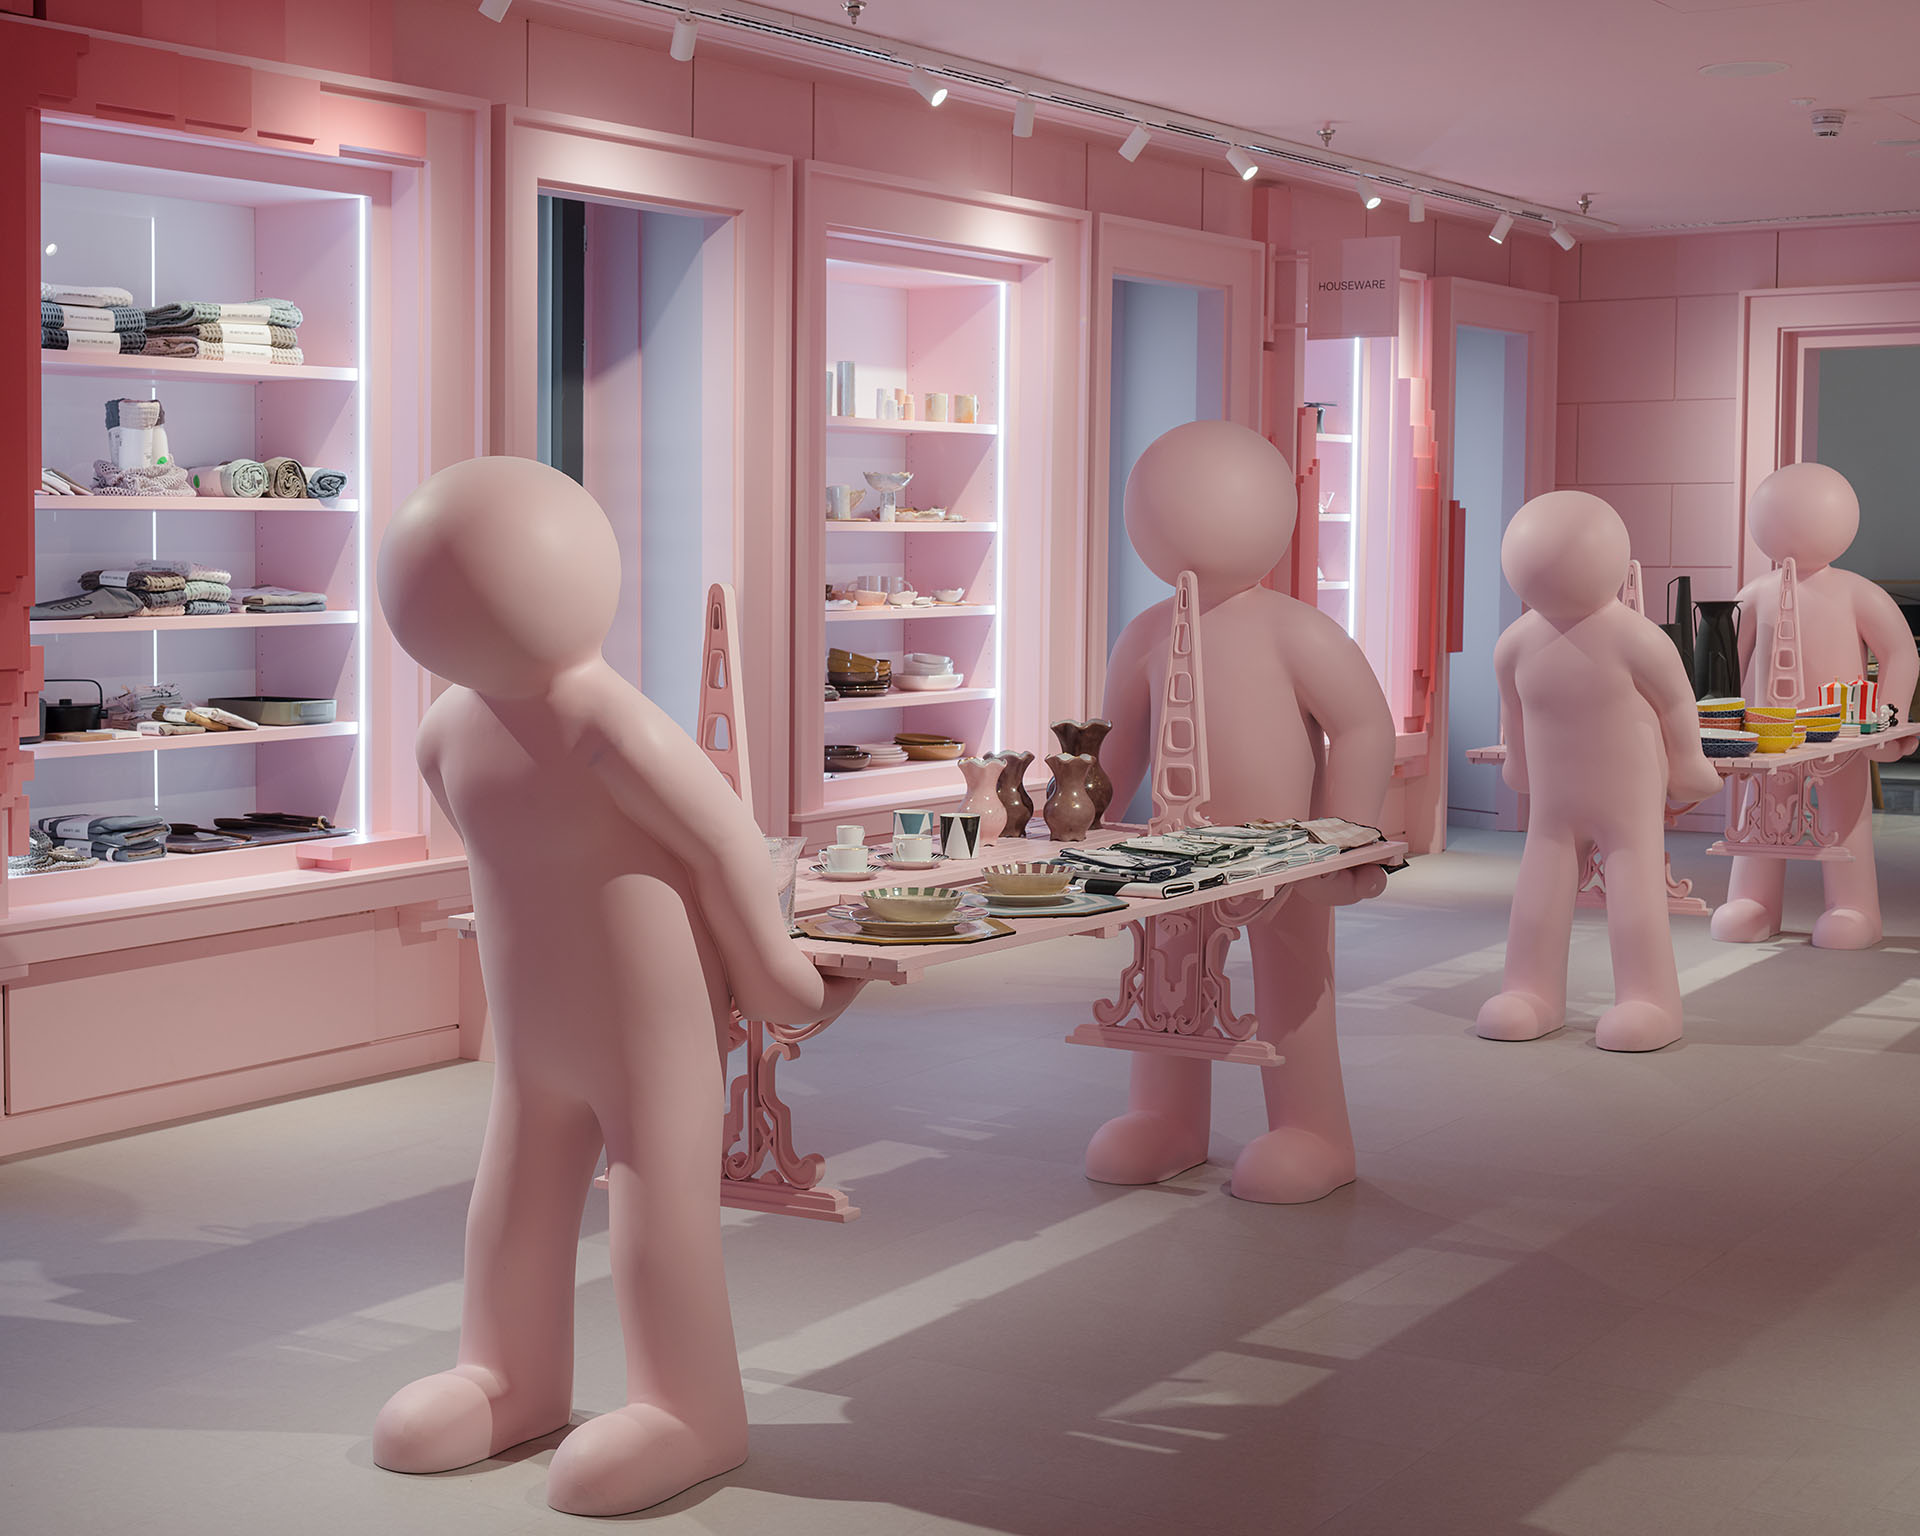 pink-walled homegoods  area of the store with large figures holding tables